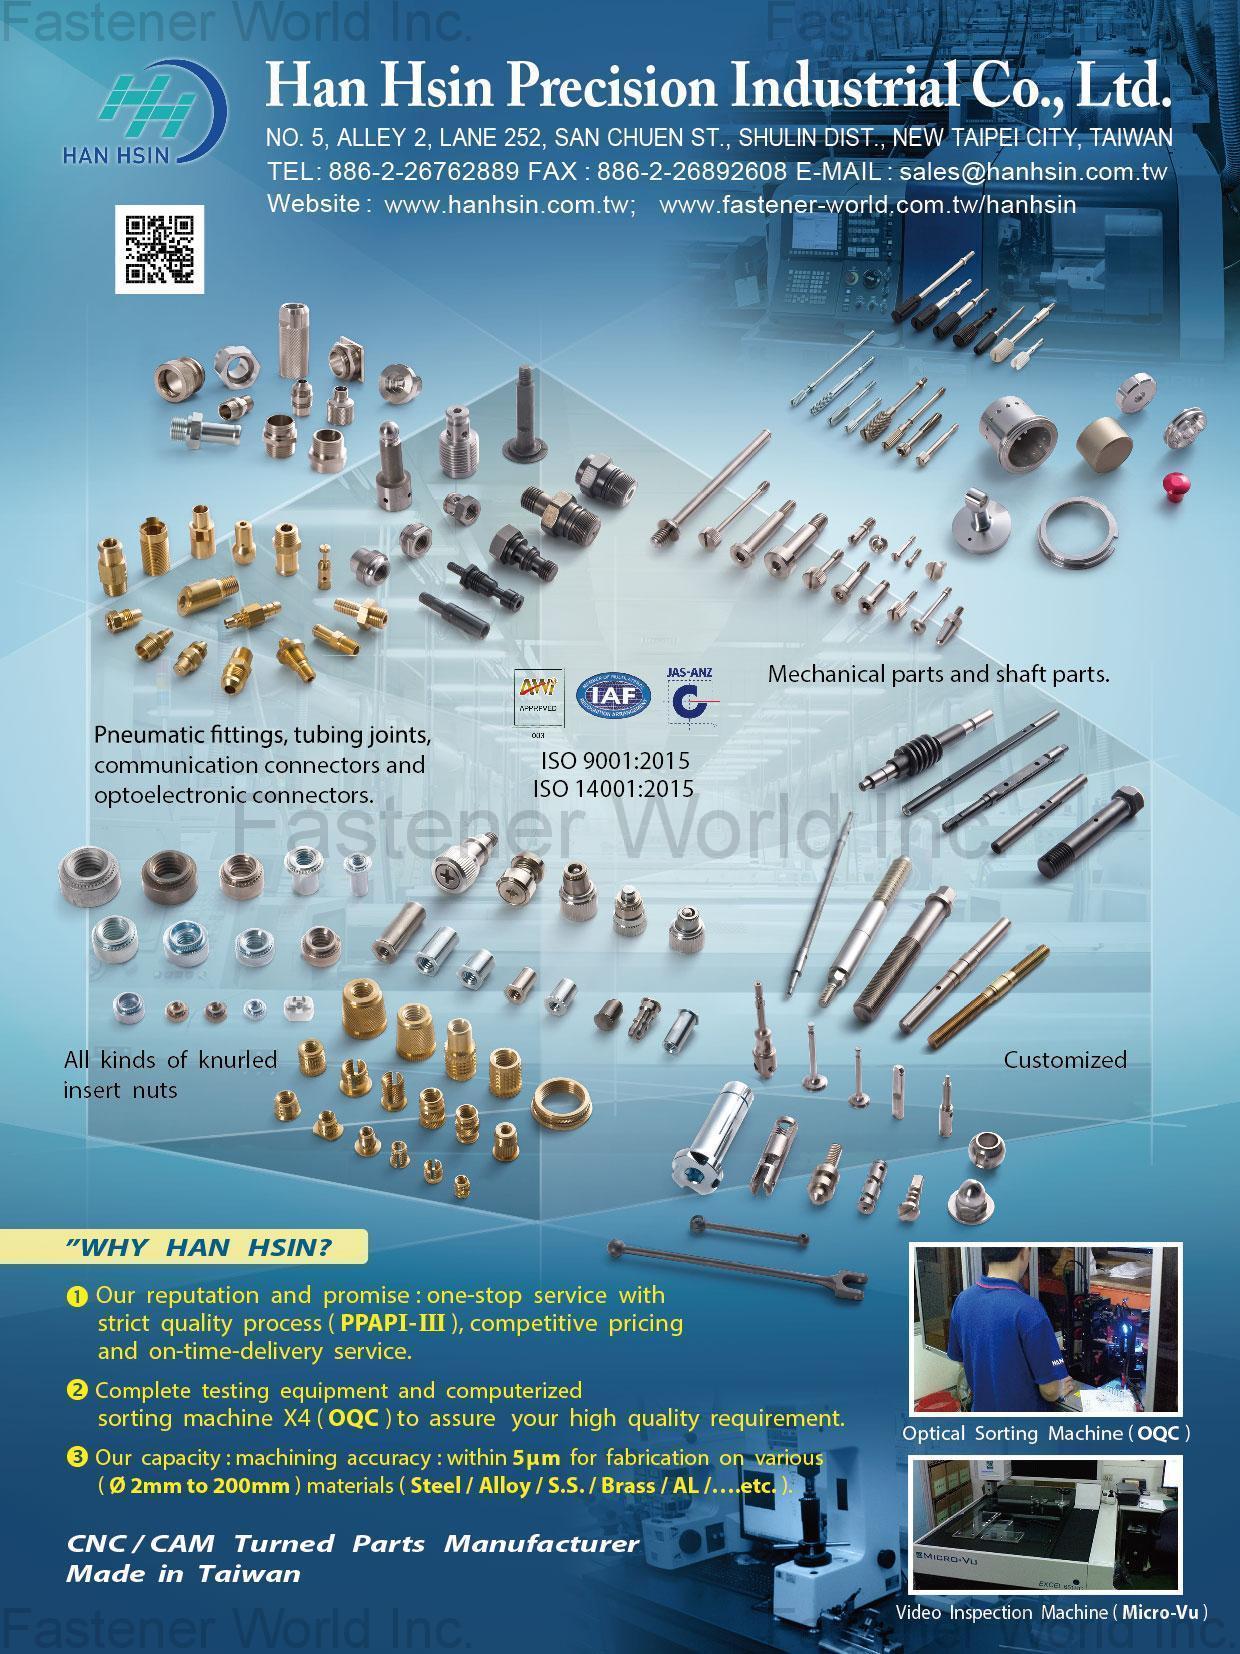 HAN HSIN PRECISION INDUSTRIAL CO., LTD. (Hanhsin) , CNC/CAM Turned parts, Various Pneumatic fittings, tubing joints, communication connectors and optoelectronic connectors. Various mechanical parts and shaft parts.Various nuts which use in chassis, Various copper nuts that insert into plastic shell and Various fasteners. , Insert Nuts